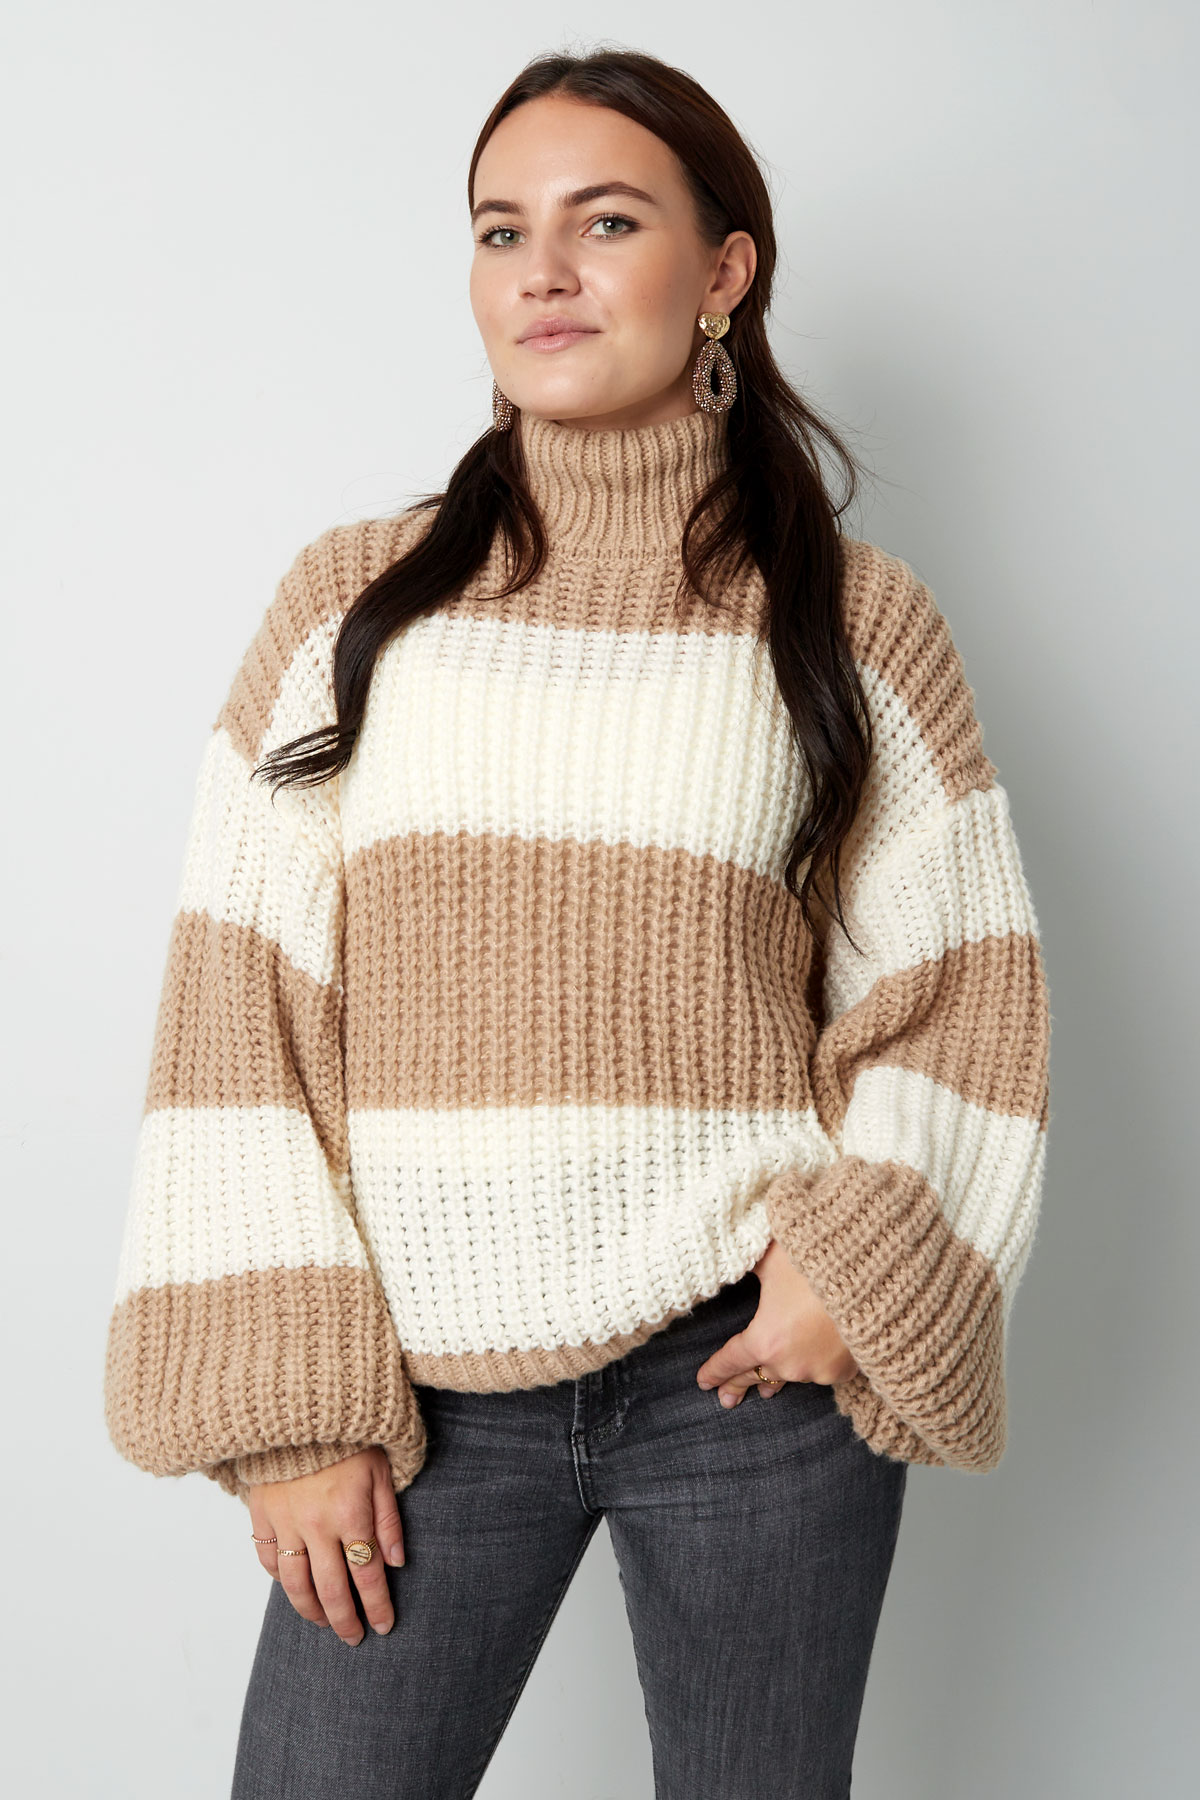 Warm knitted striped sweater - black and white Picture7